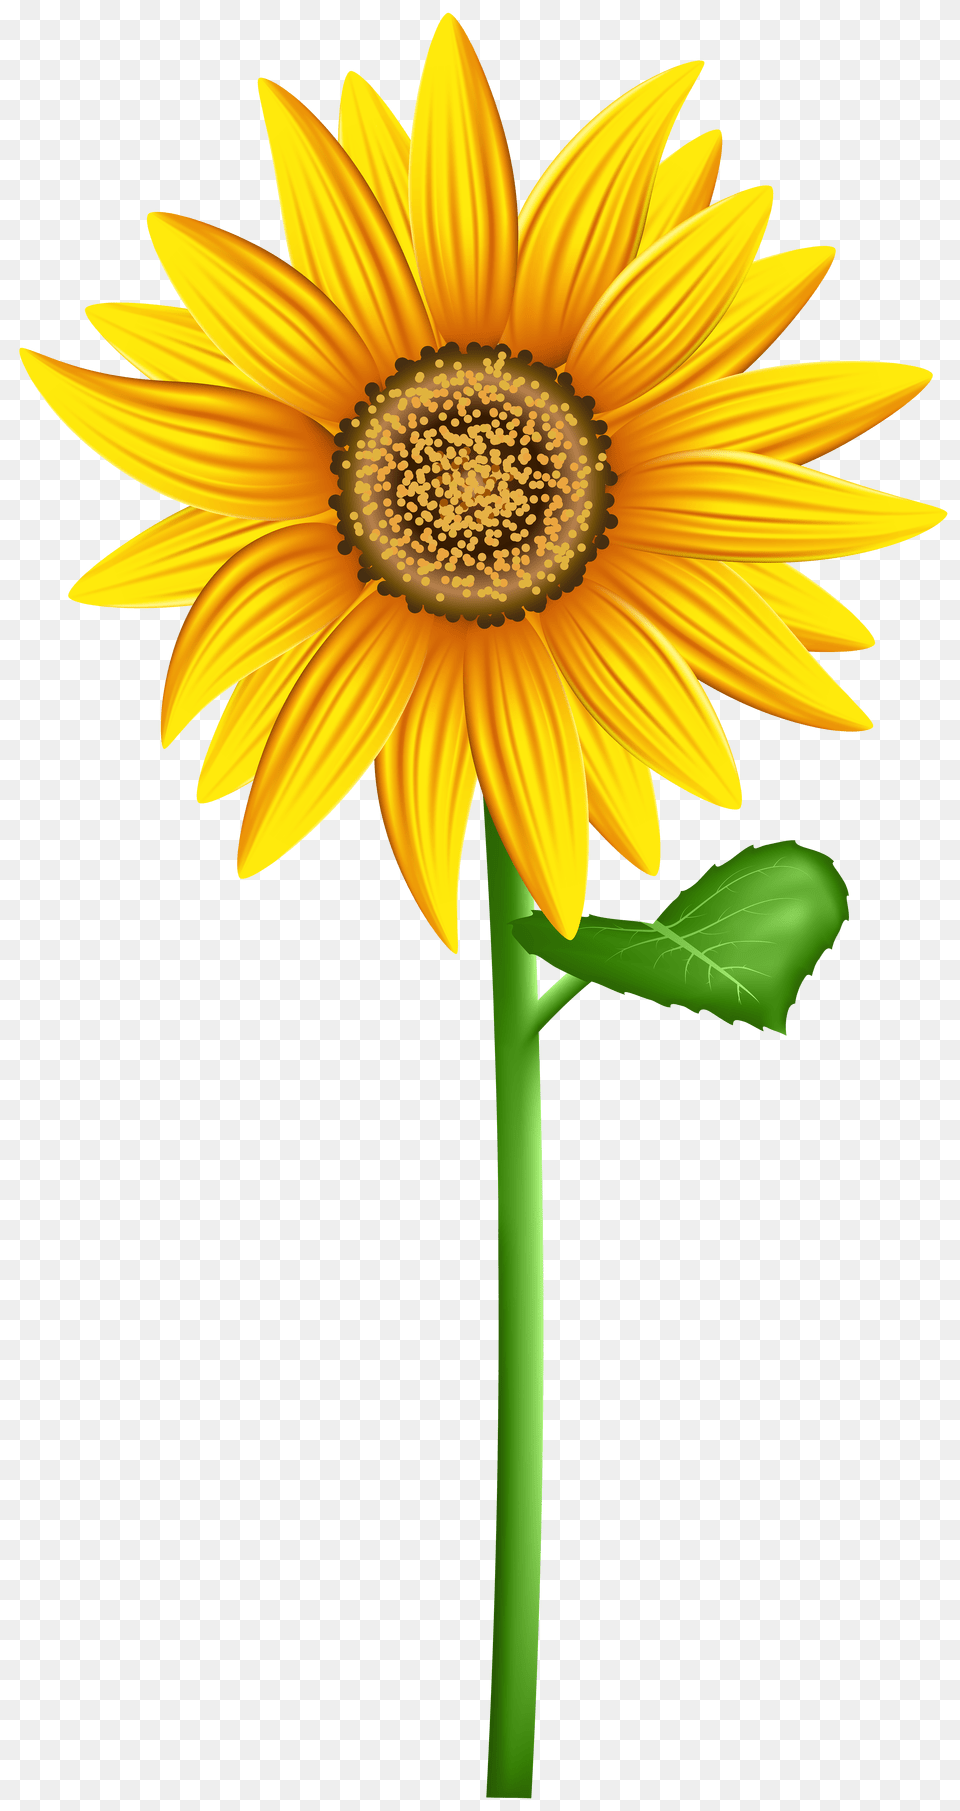 Sunflower Crown Transparent Clipart Background, Armor Free Png Download